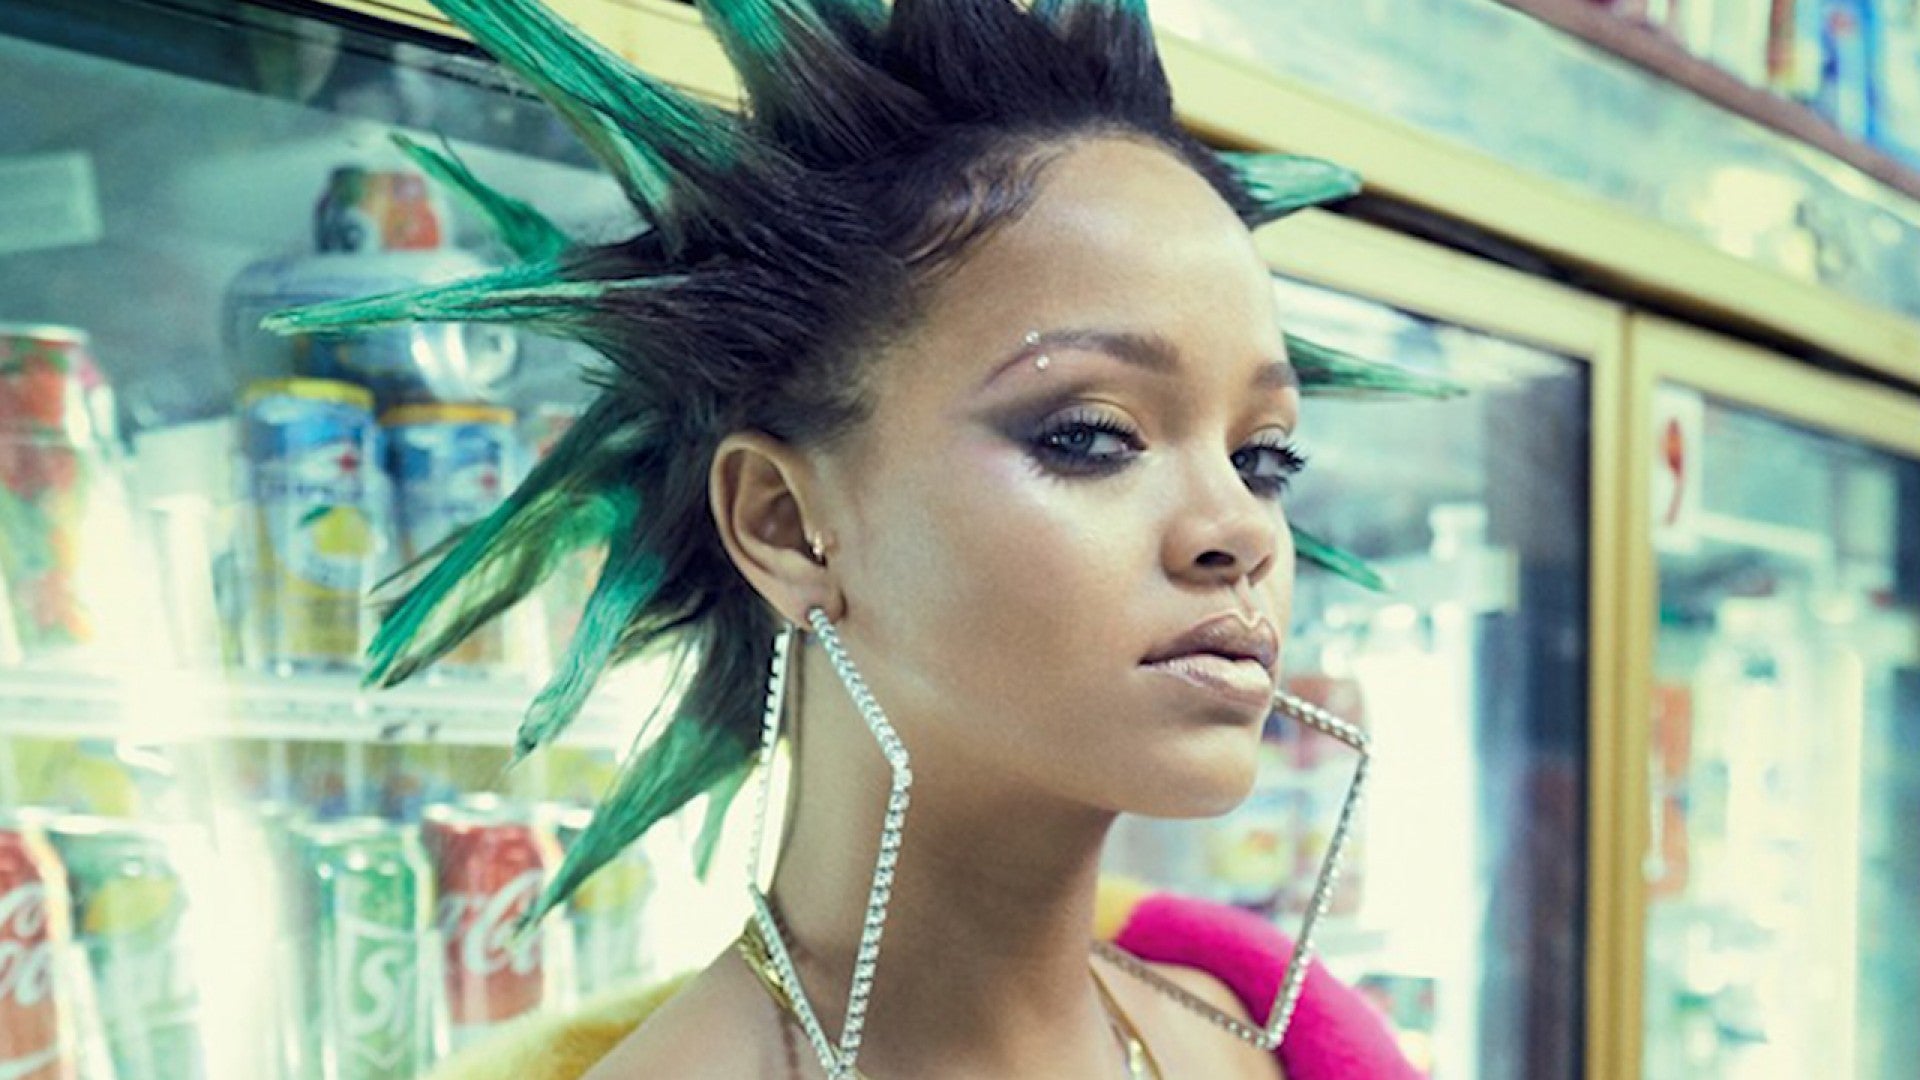 Rihanna Gets a Complete Punk Rock Makeover -- See Her Shocking New Style |  Entertainment Tonight